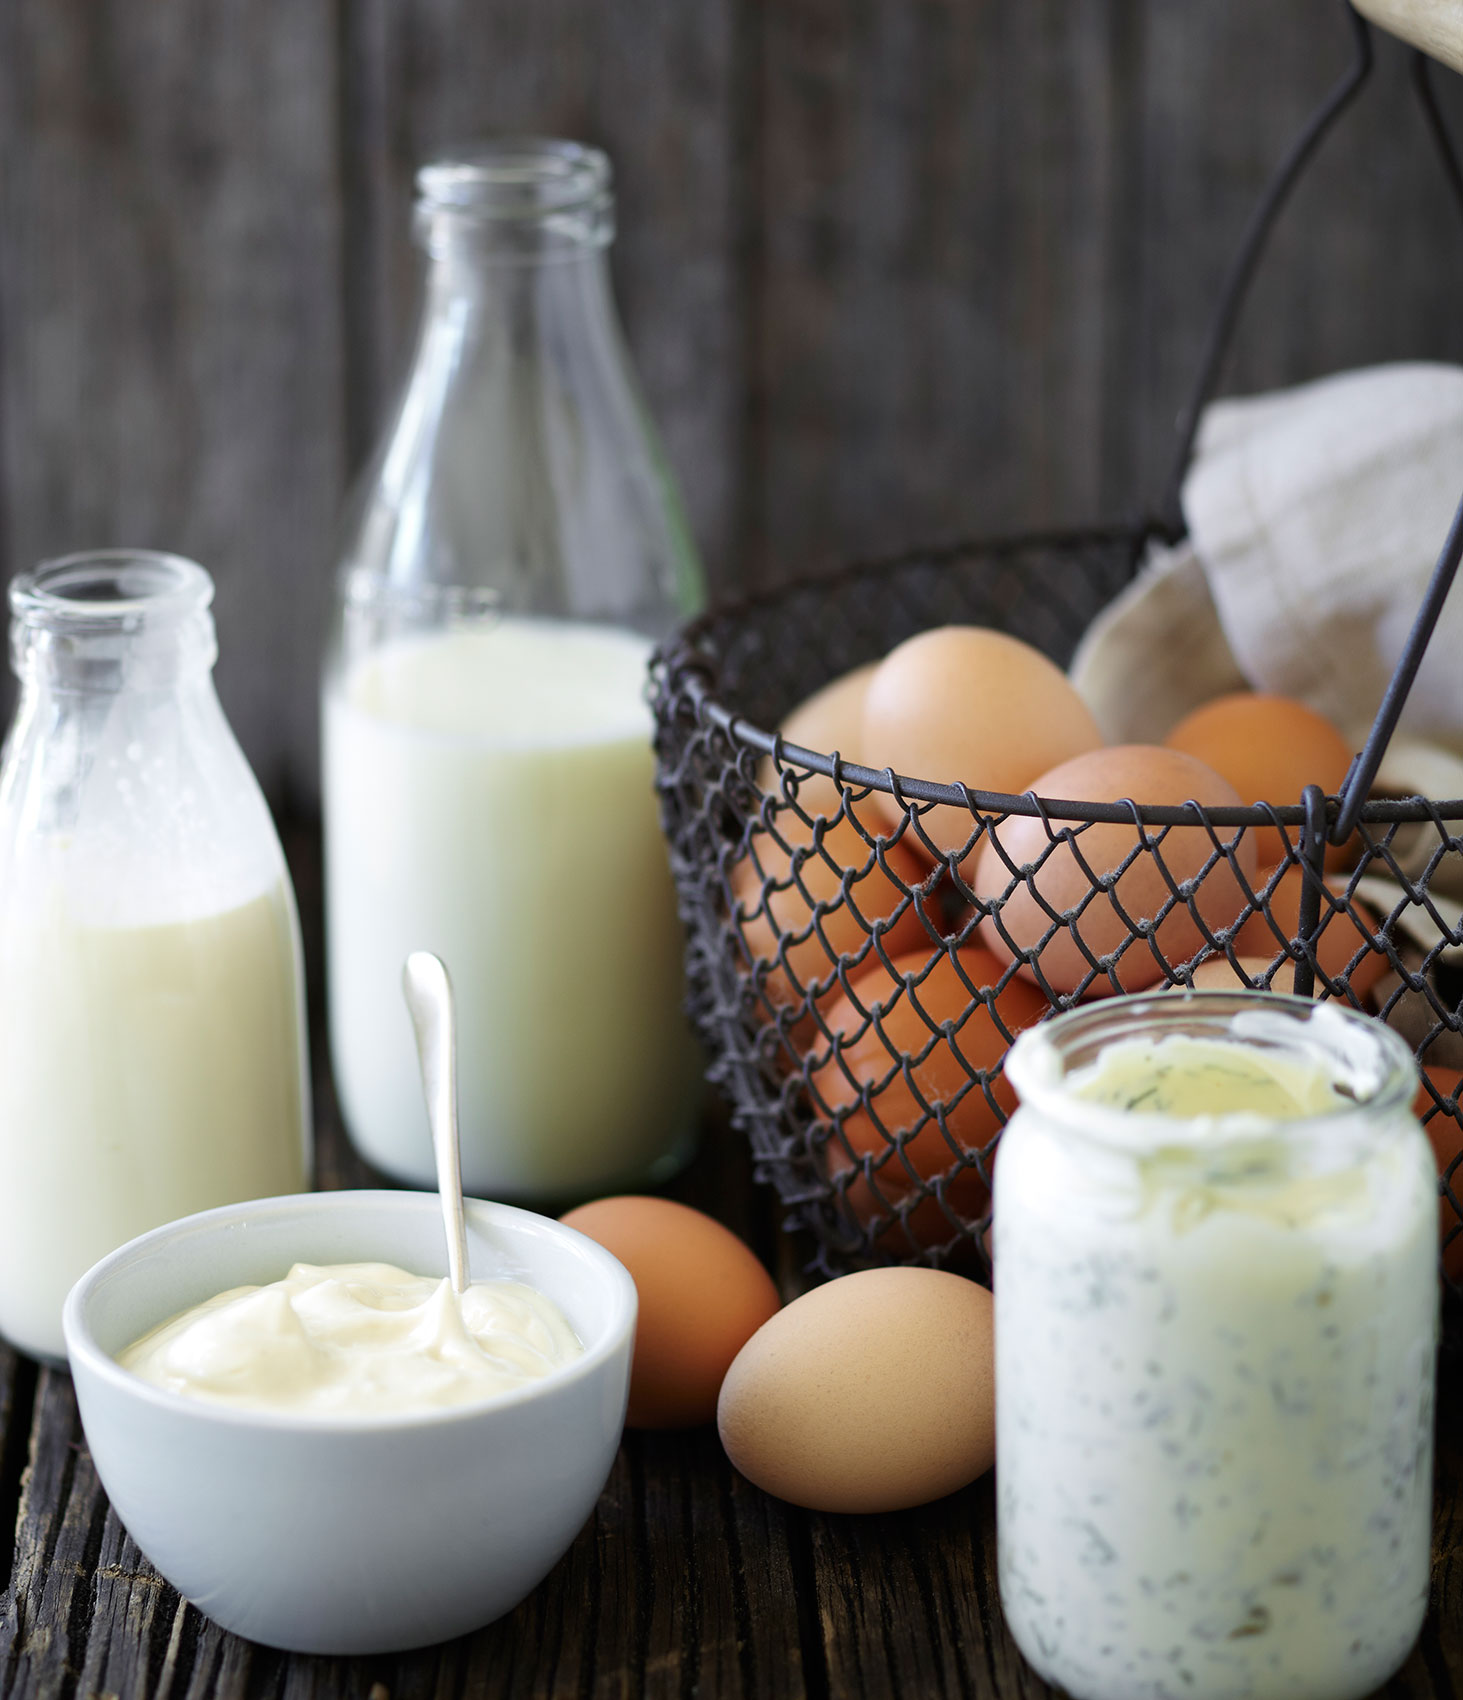 Free Range in the City • Fresh Milk, Eggs & Dips in the Larder  • Cookbook & Lifestyle Food Photography